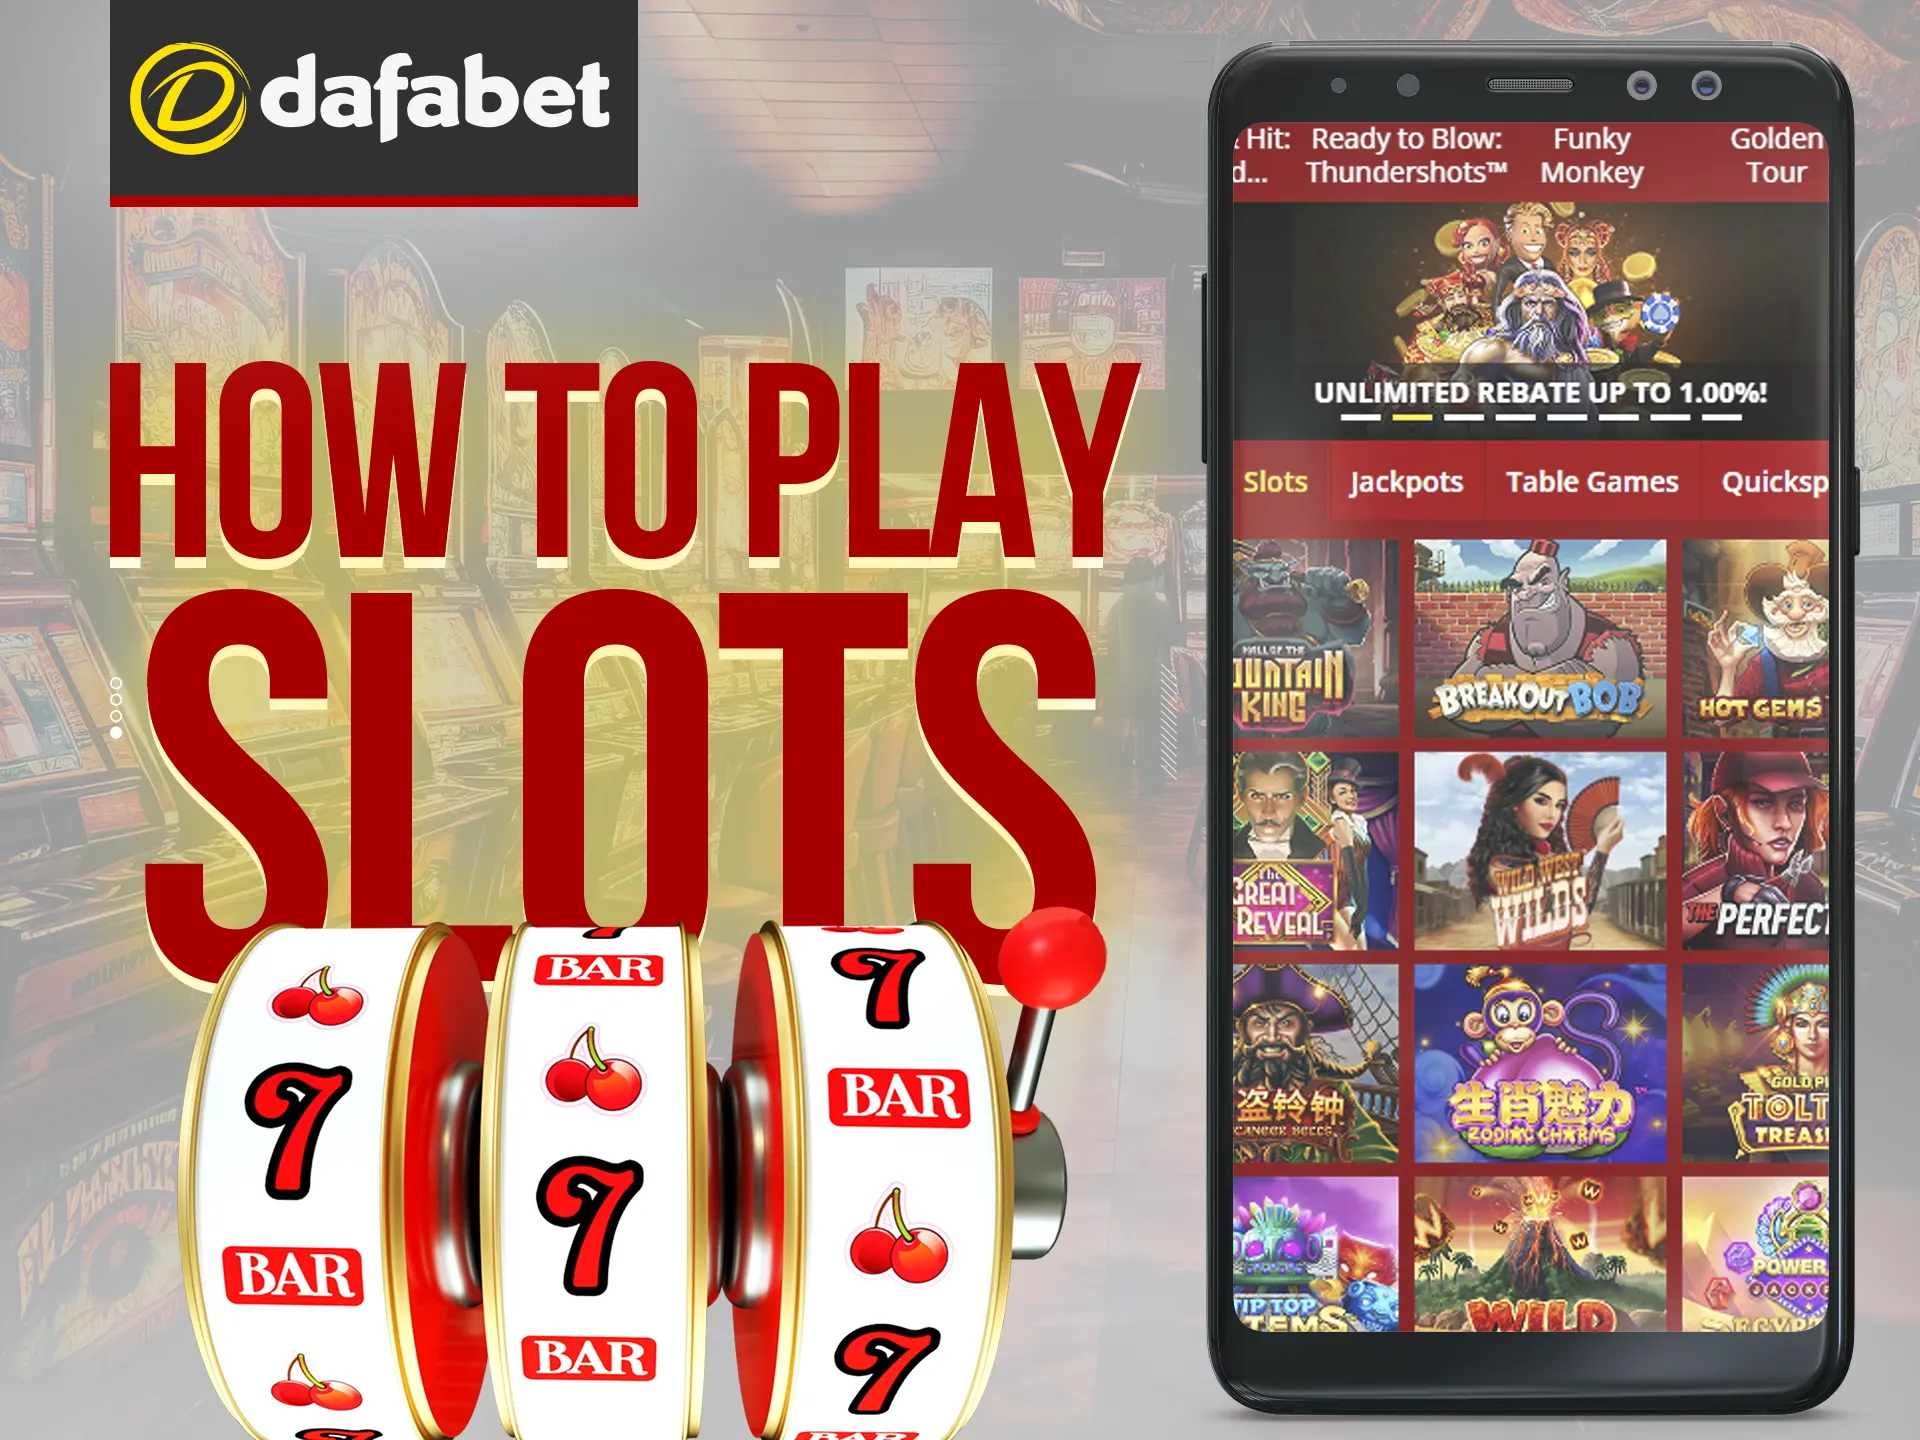 How to start playing slots at Dafabet: log in, choose a machine, and adjust bet size.